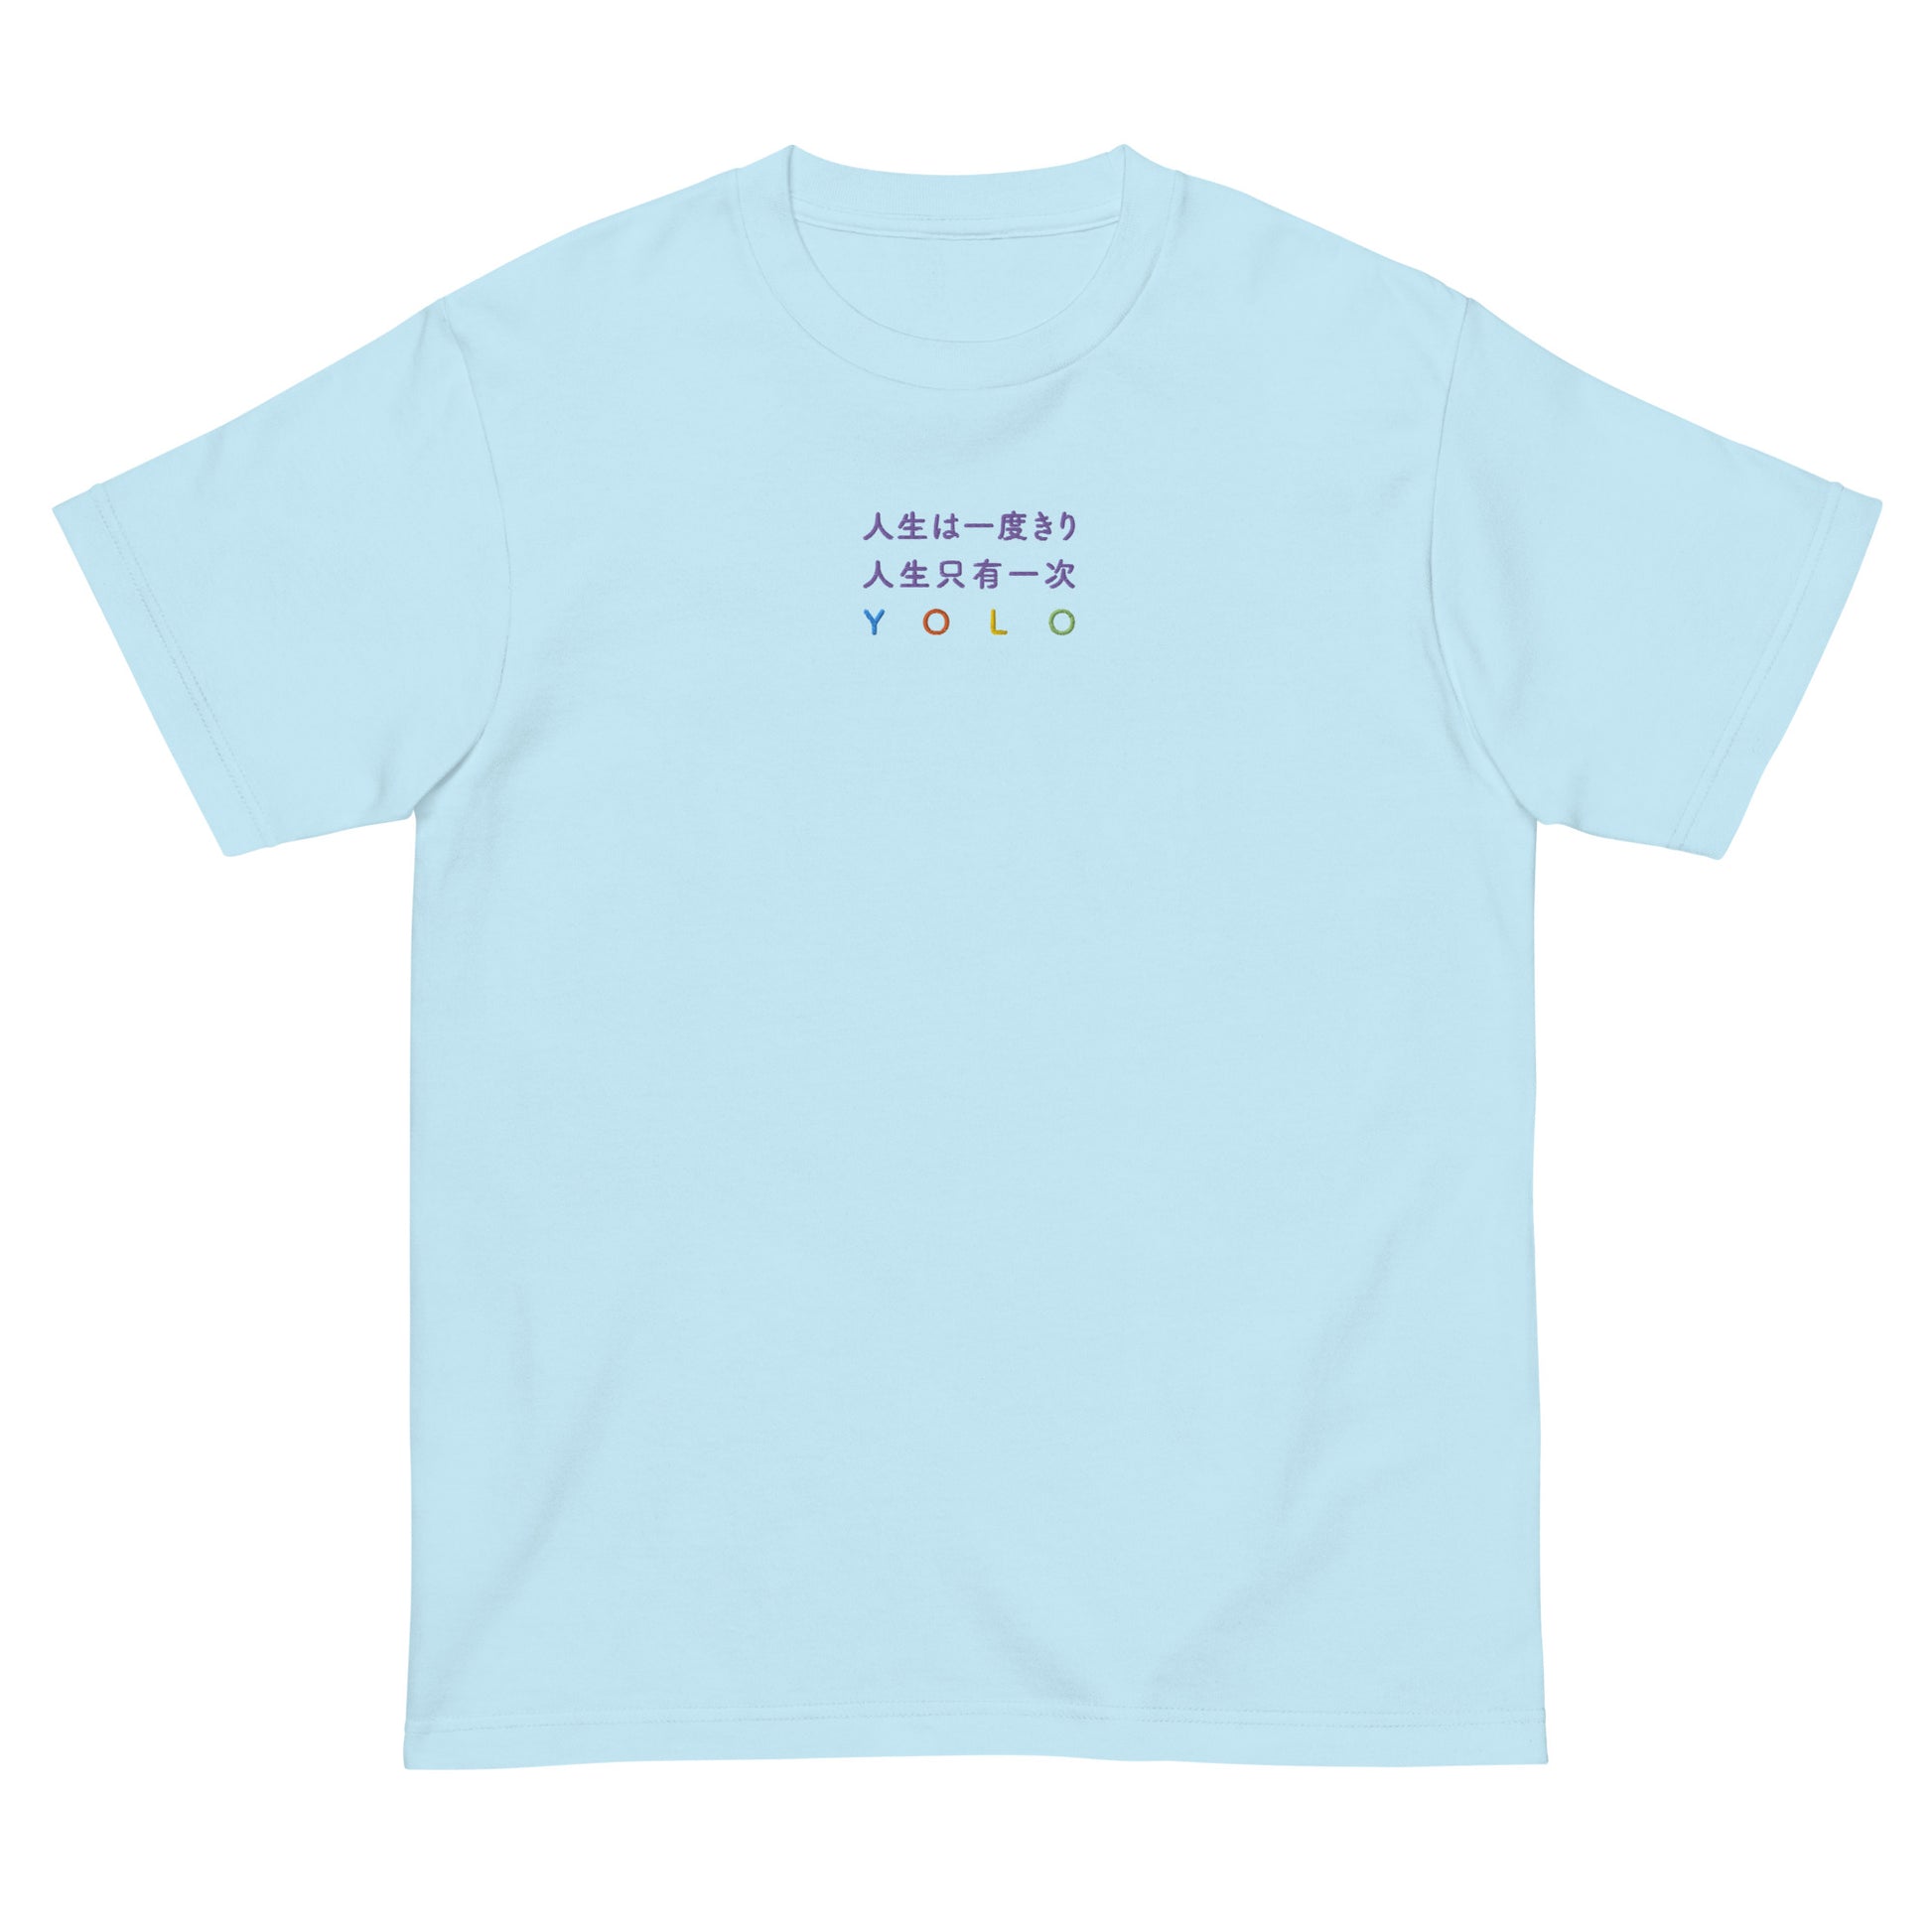 Light Blue High Quality Tee - Front Design with an Purple, Light Blue, Orange, Yellow, Light Green Embroidery "YOLO" in Japanese,Chinese and English